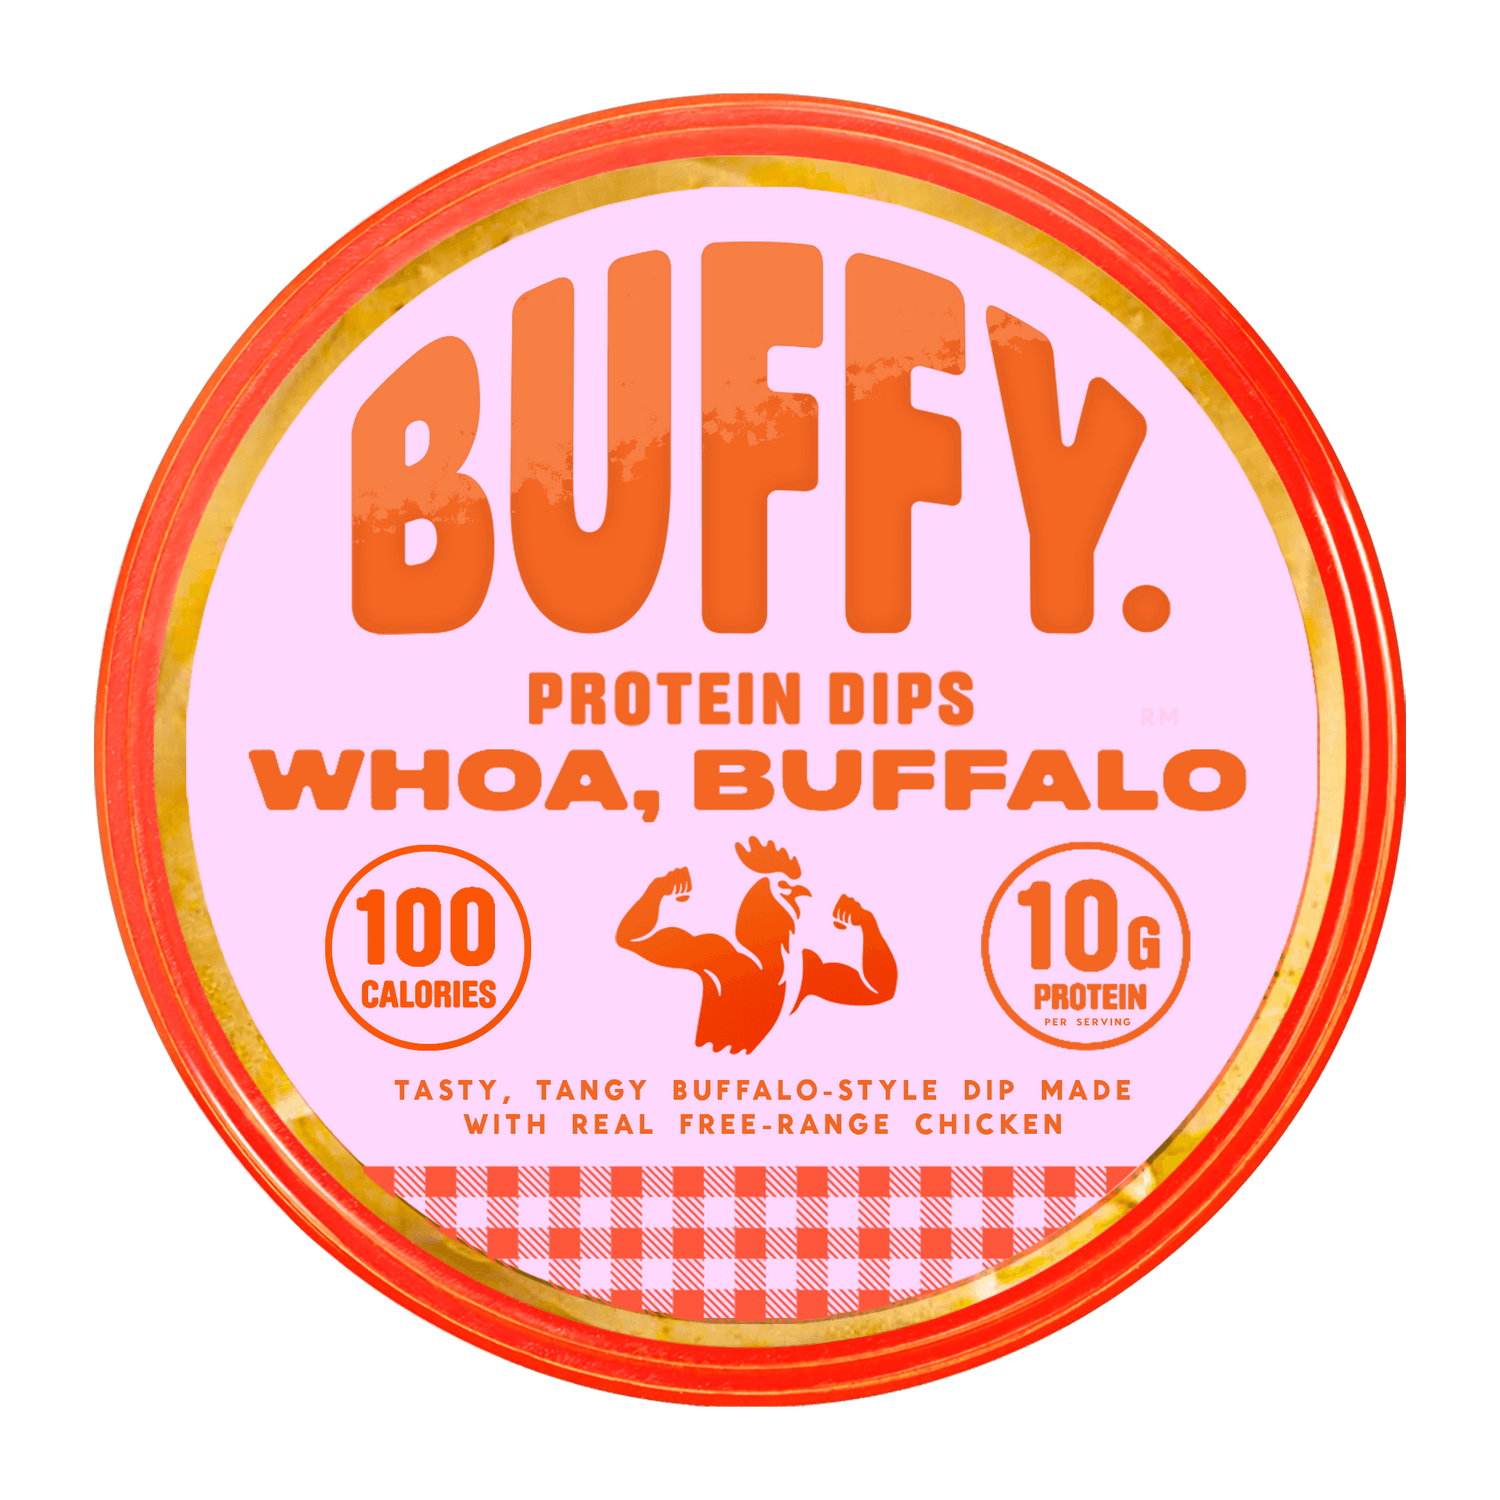 Buffy Protein Dips - Whoa, Buffalo - 100 Calories - 10G Protein per serving - Tasty, tangy buffalo-stye dip made with real free-range chicken